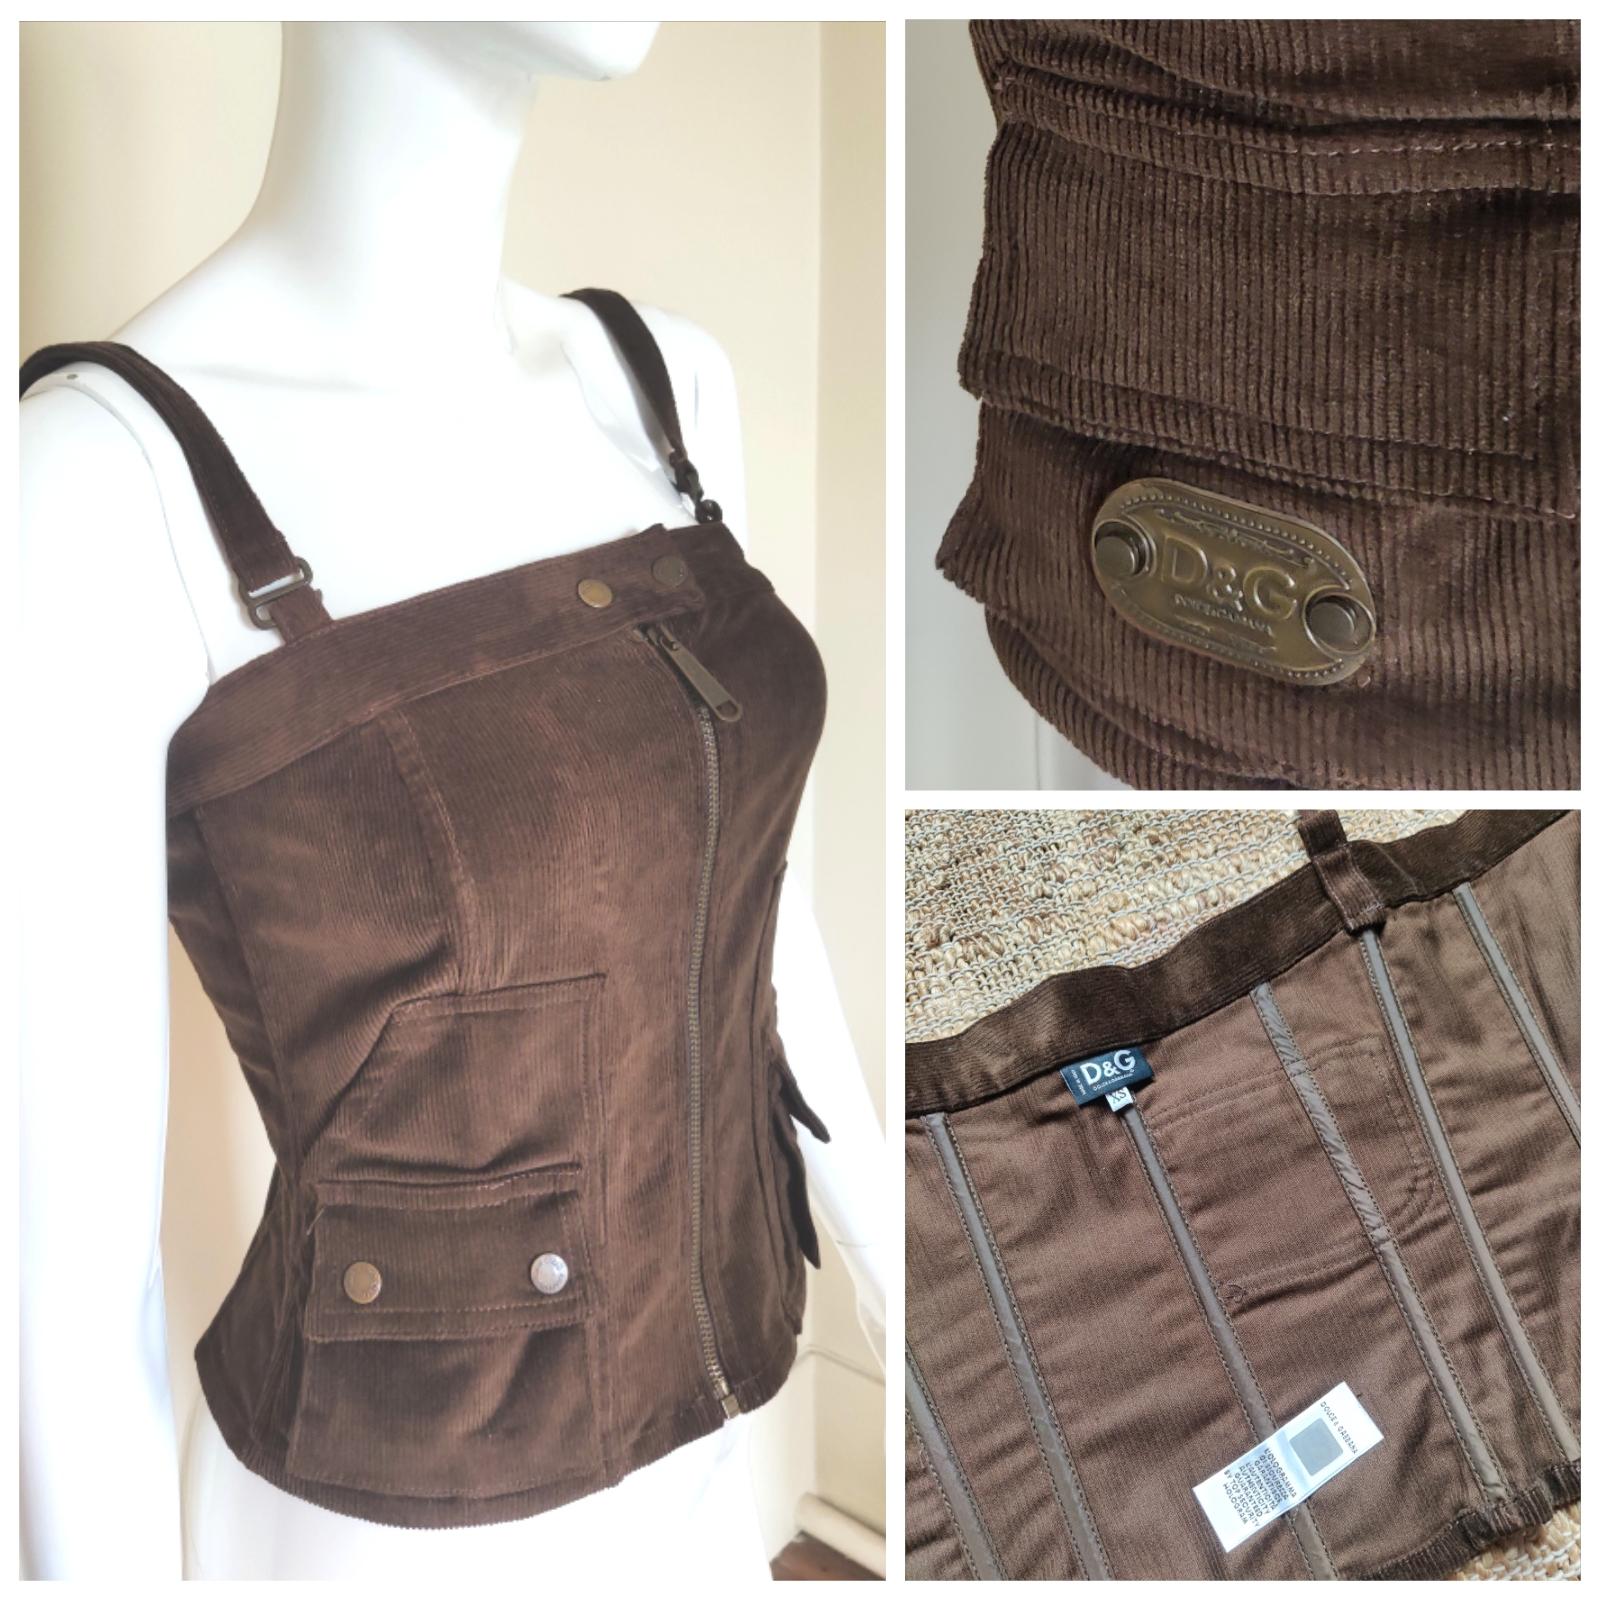 Dolce and Gabbana corset from the 90s!
Cargo style!
4 pockets on the front, 1 pocket on the back!

VERY GOOD condition!
Size: XS.
Length with straps: 48 cm / 18.9  inch
Armpit to armpit: 35 cm / 13.8 inch
Waist: 33 cm /  13 inch

Made in Italy!